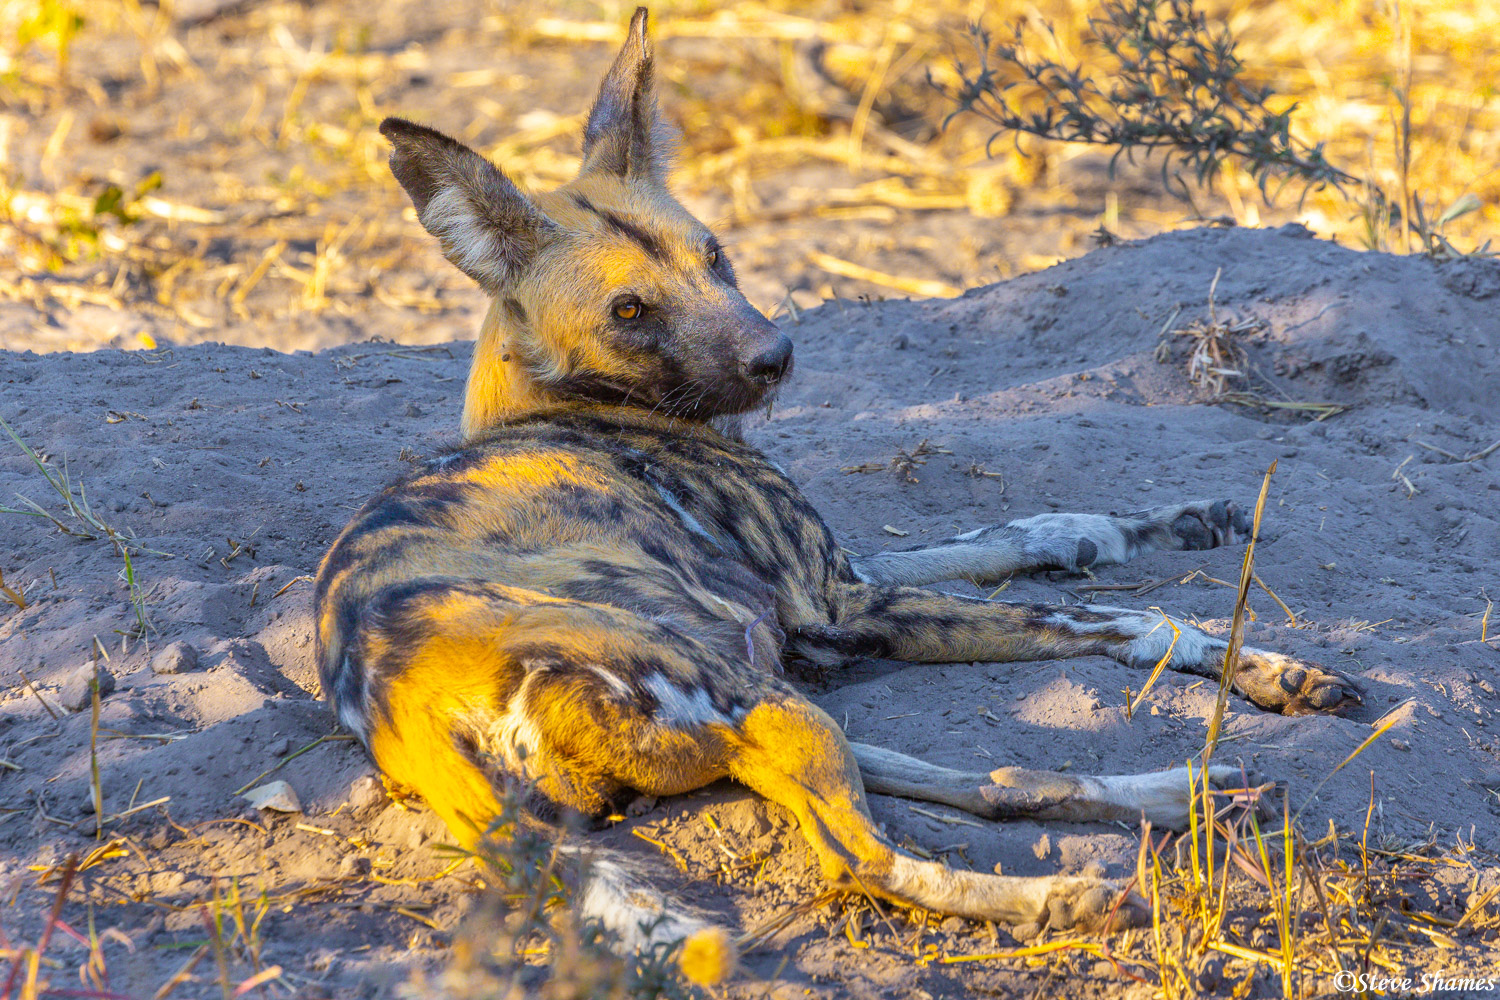 Here is the alpha female of the wild dog pack. She stays at home with the pups, who are hiding in the den at this moment.